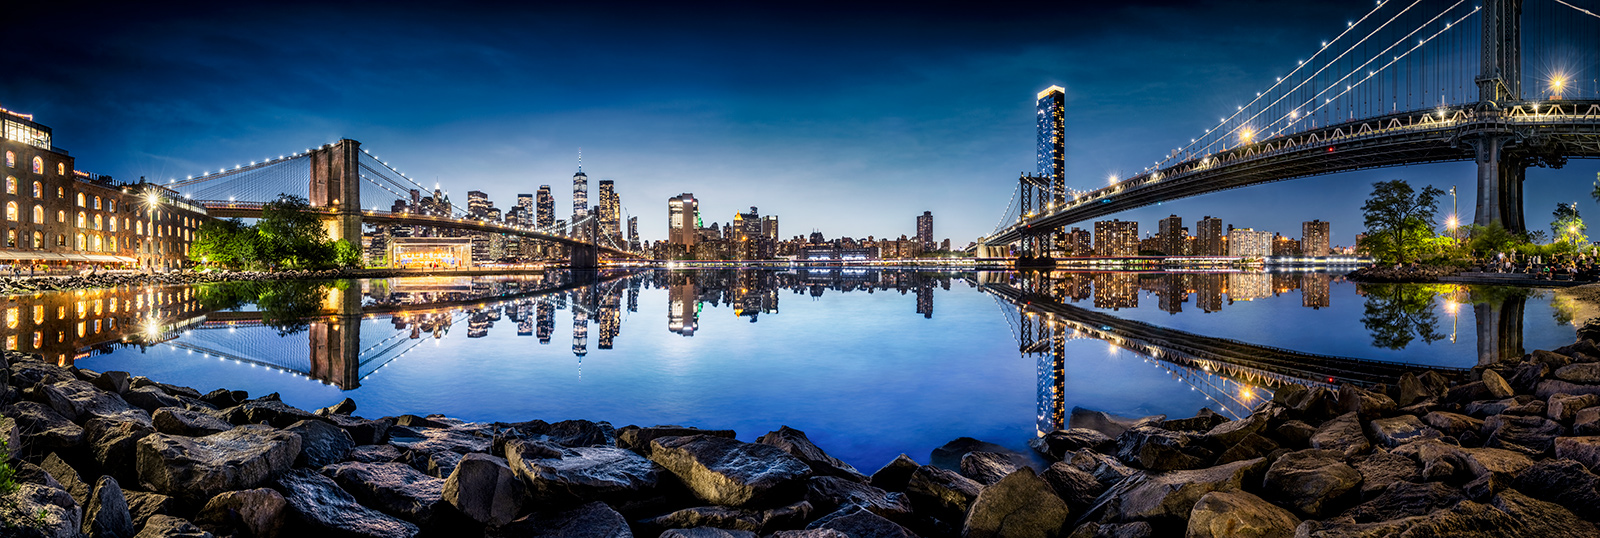 Blue hour panorama from Dumbo in Brooklyn